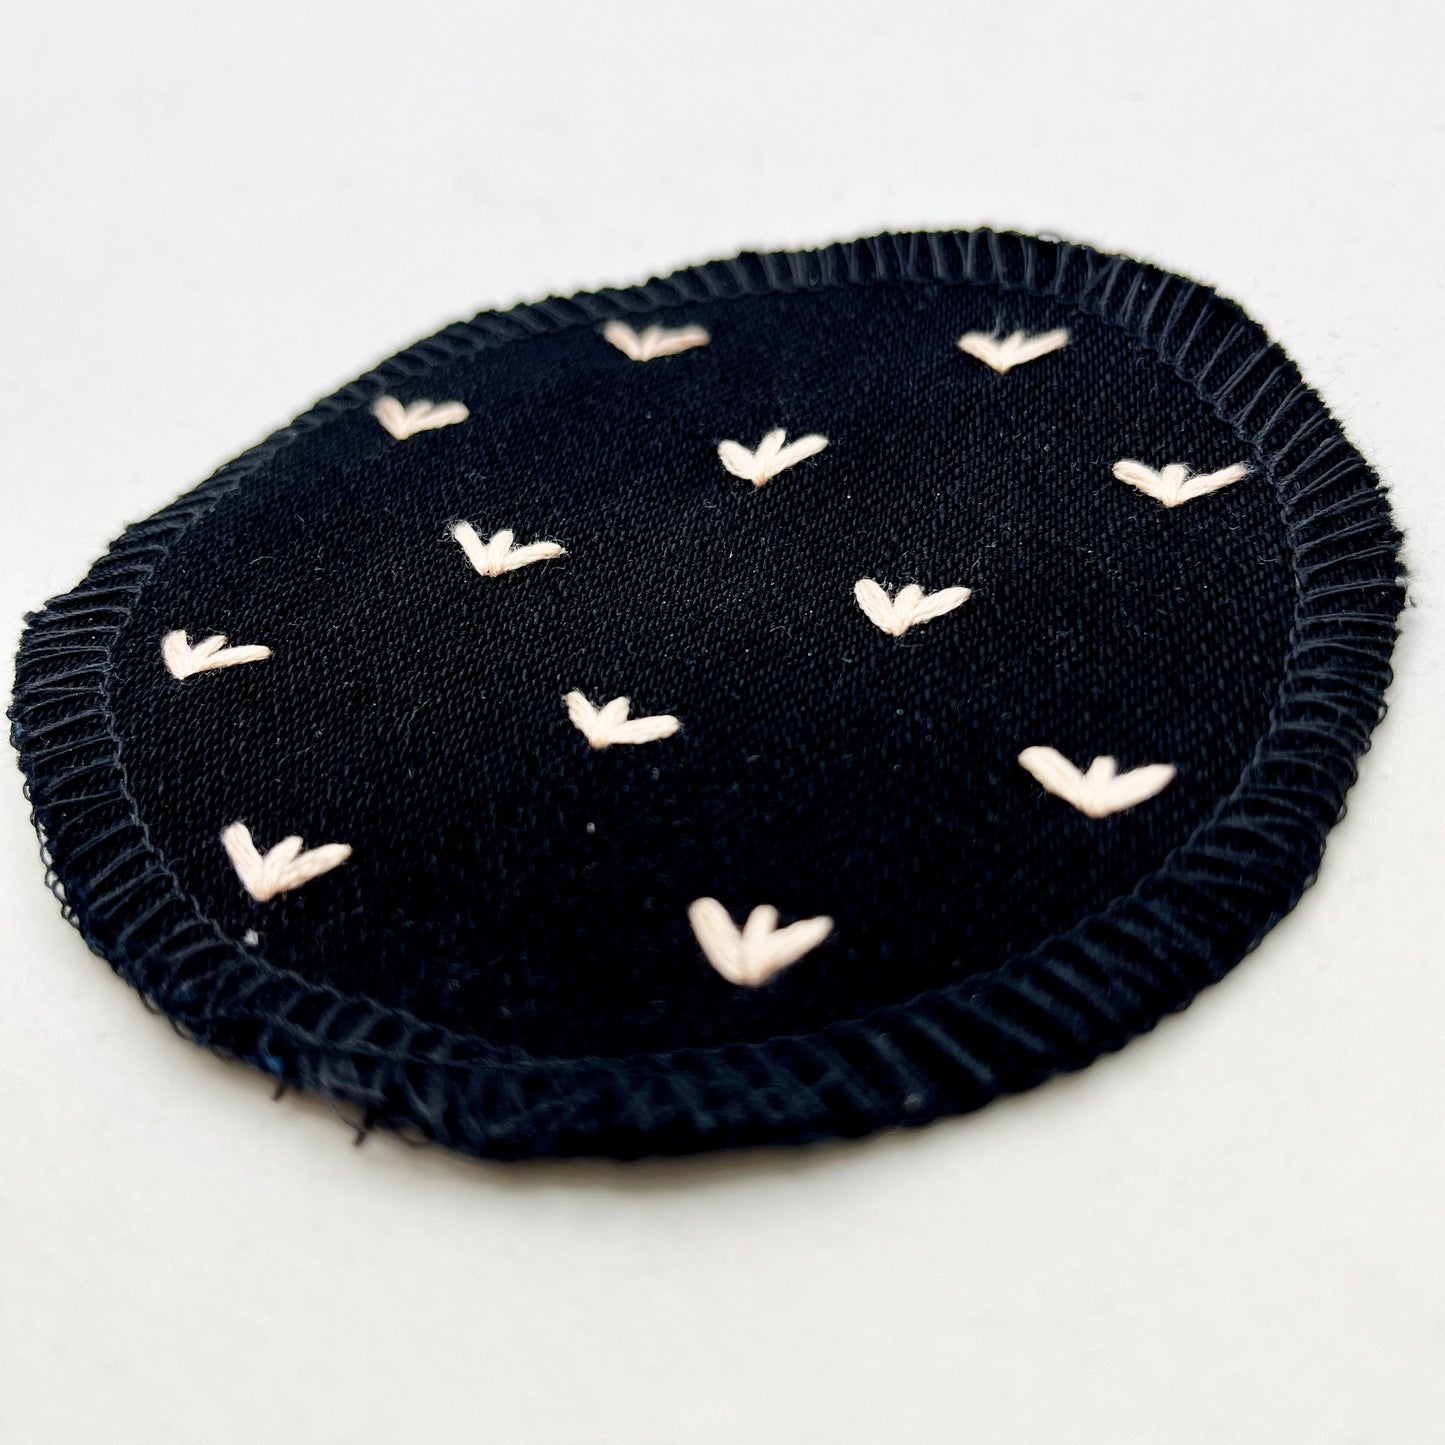 a close up angled view of a circle shaped patch made out of black denim, with overlocked edges, with stitches in peach that look like sprouts or birds feet, on a white background